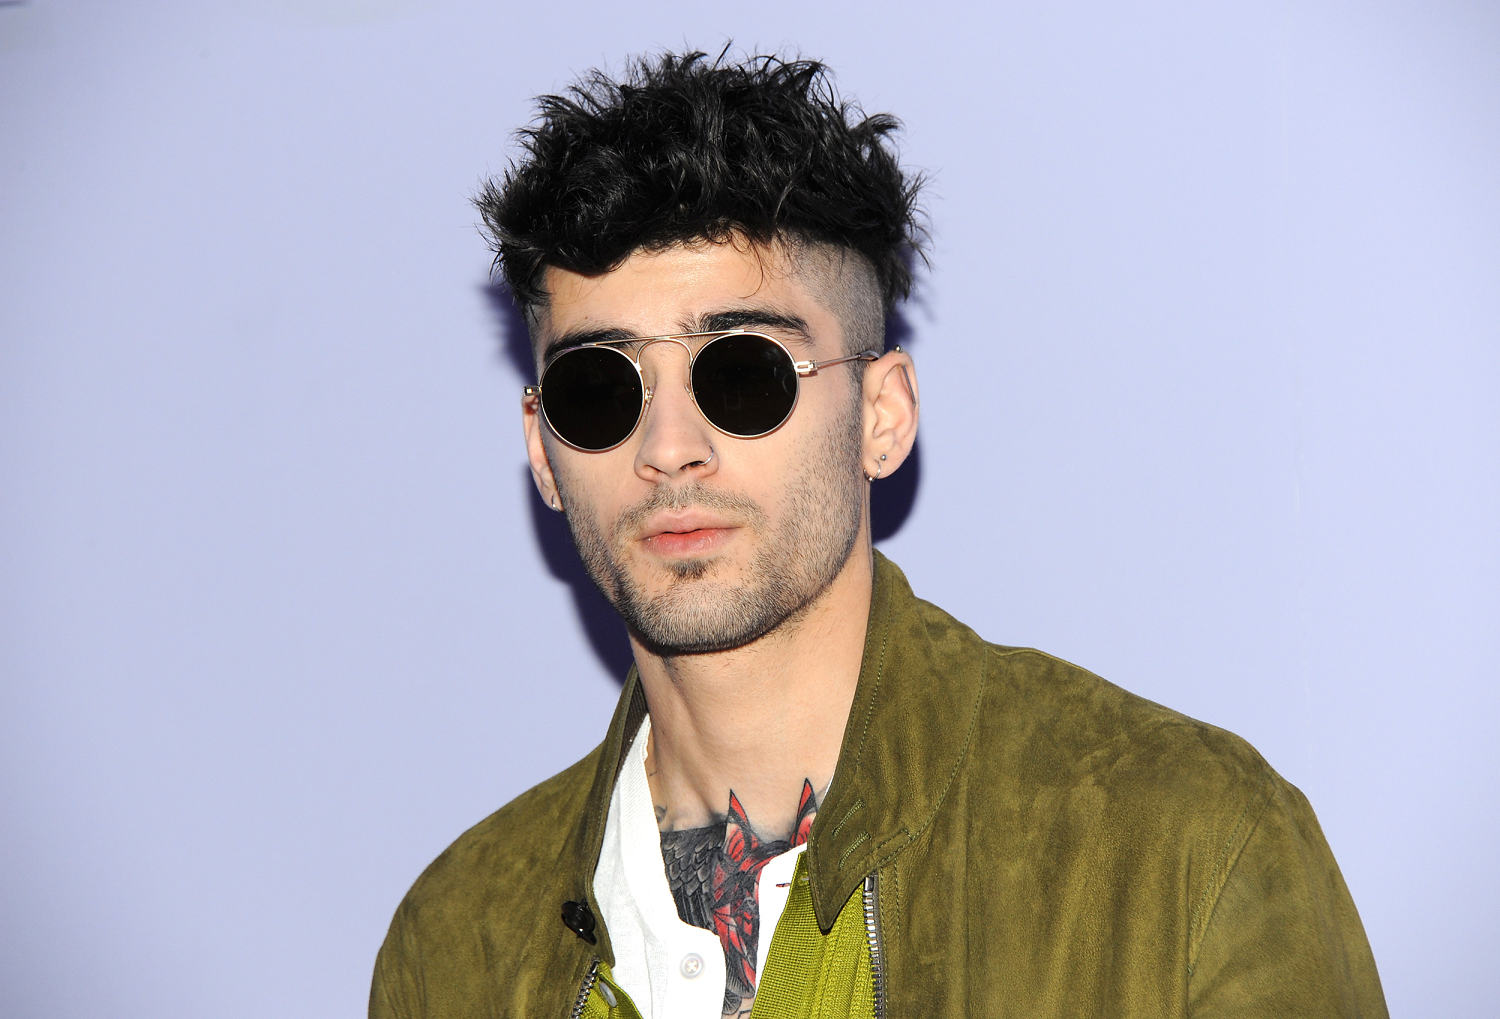 One Direction star Zayn Malik records Urdu song and South Asian fans are obsessed